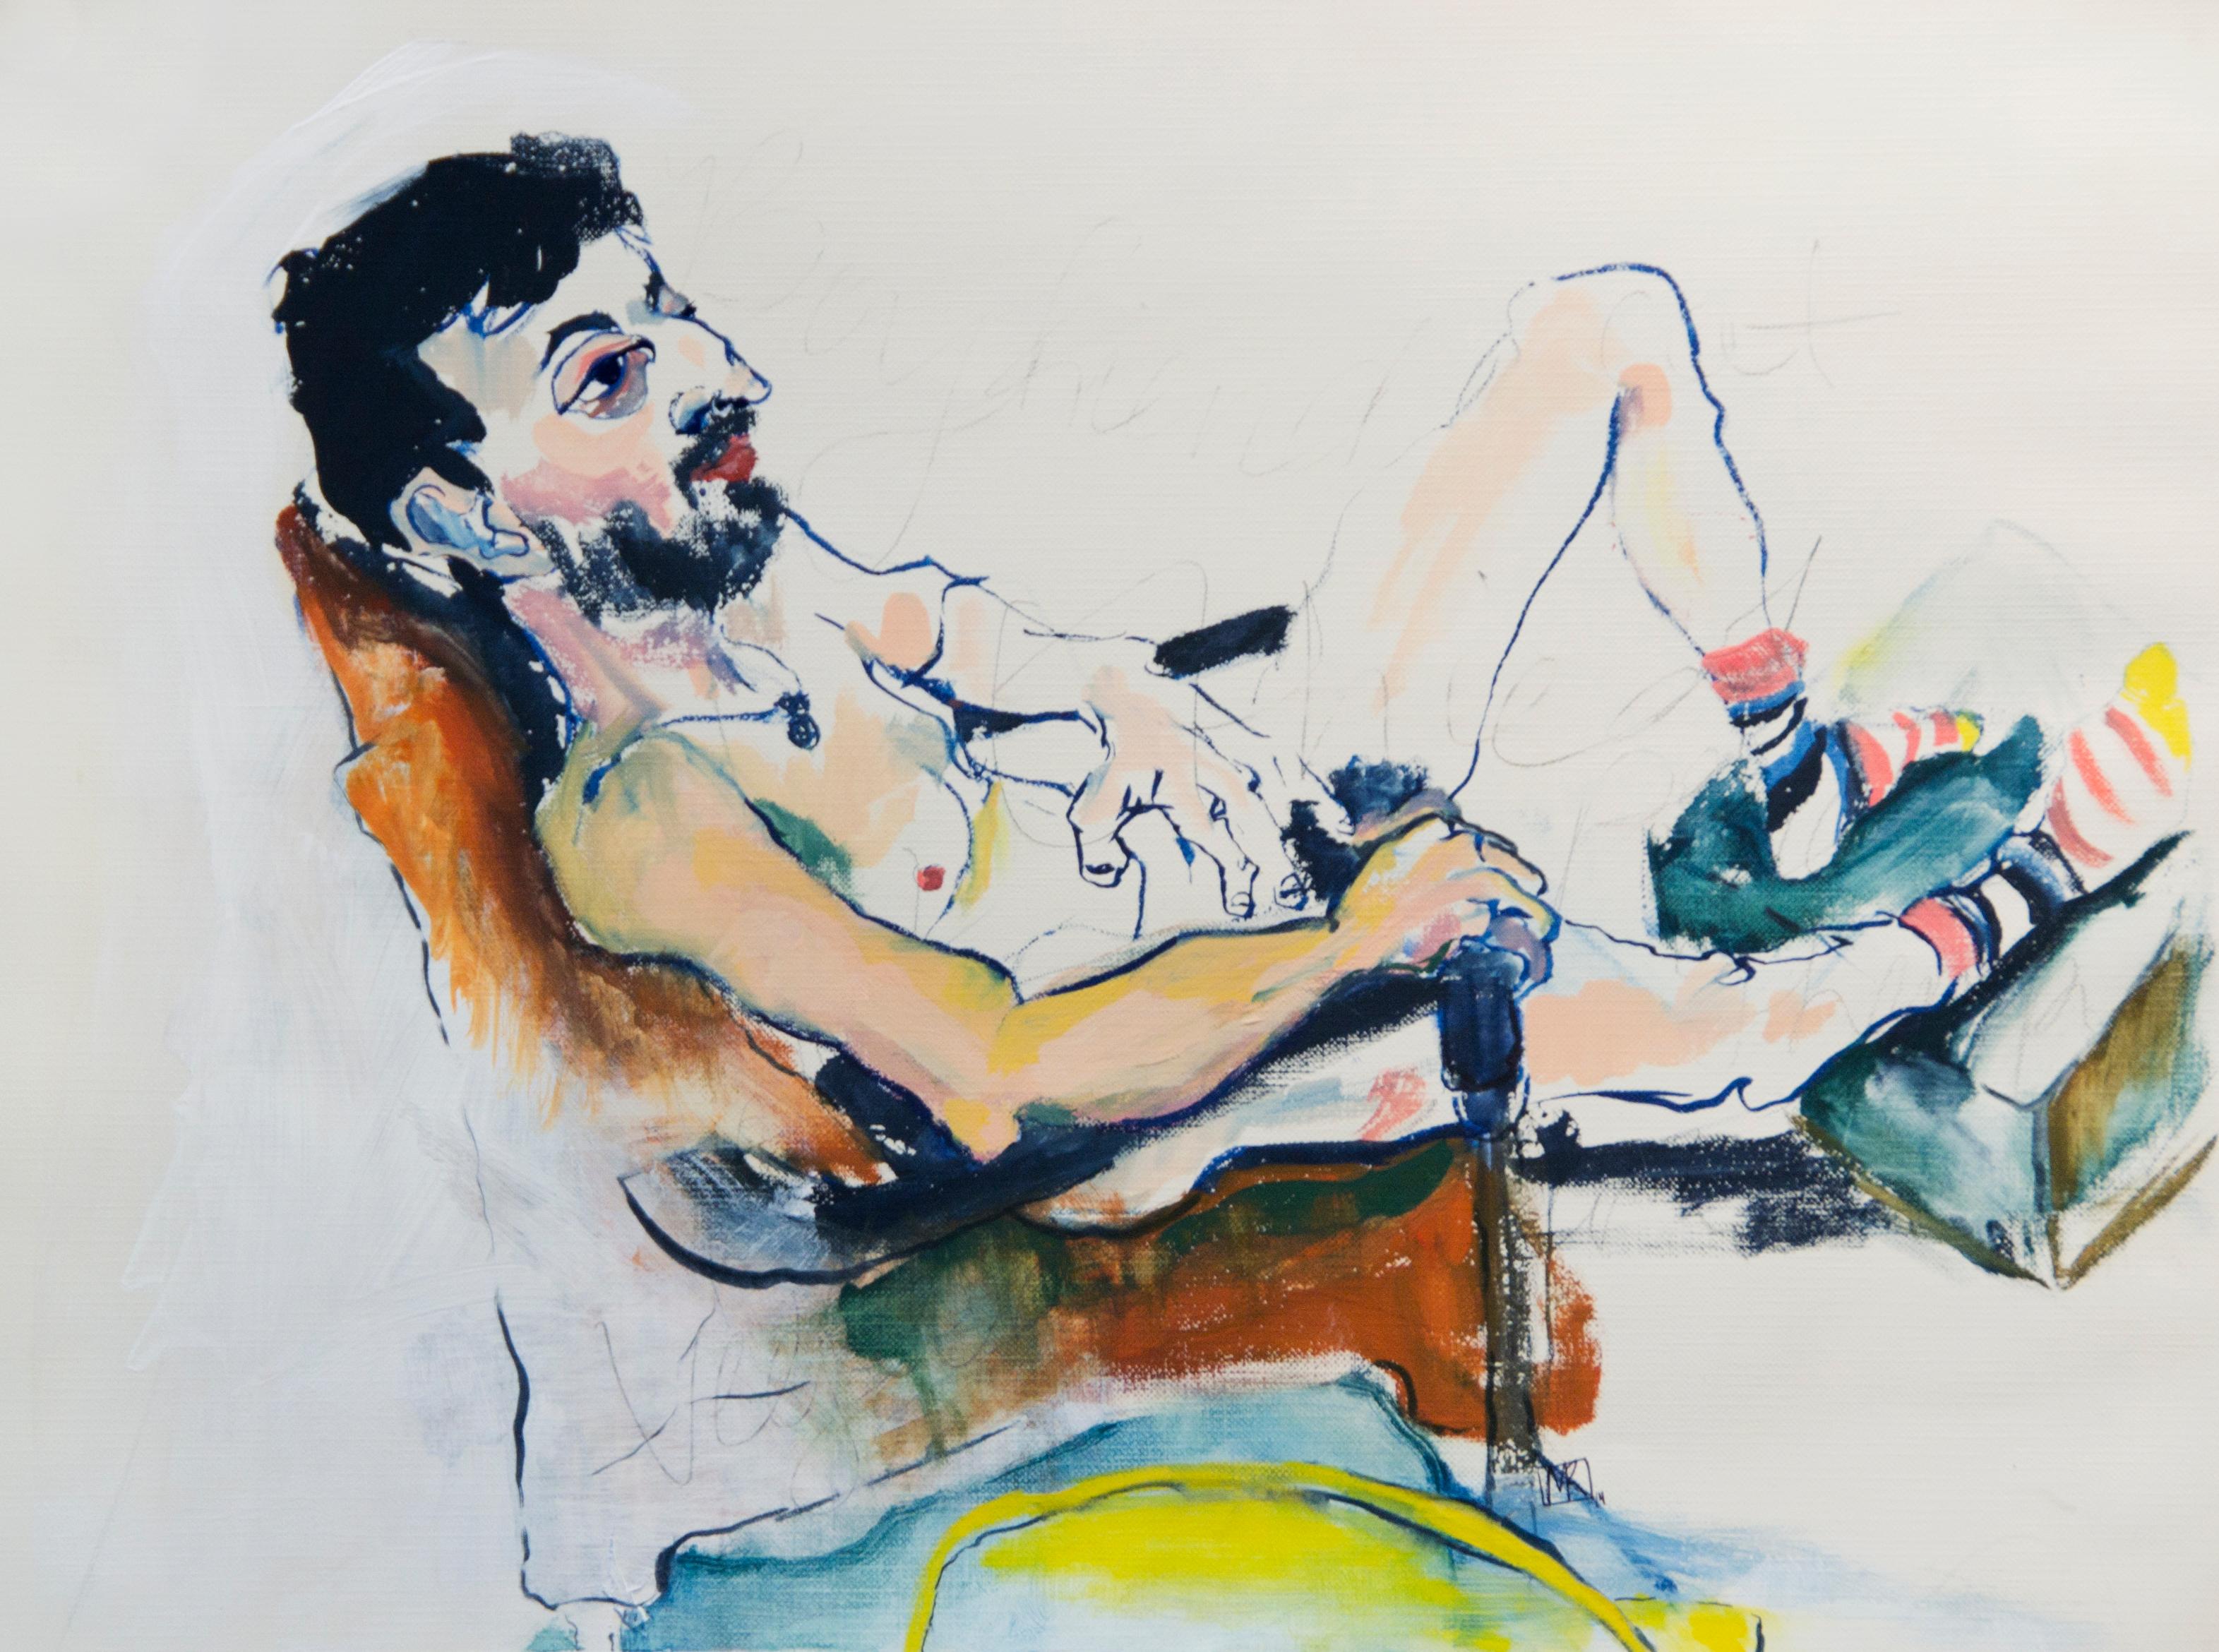 Mel Reese Figurative Painting - "Danny", lounging nude figure painting w/ pencil, gouache, and acrylic on paper